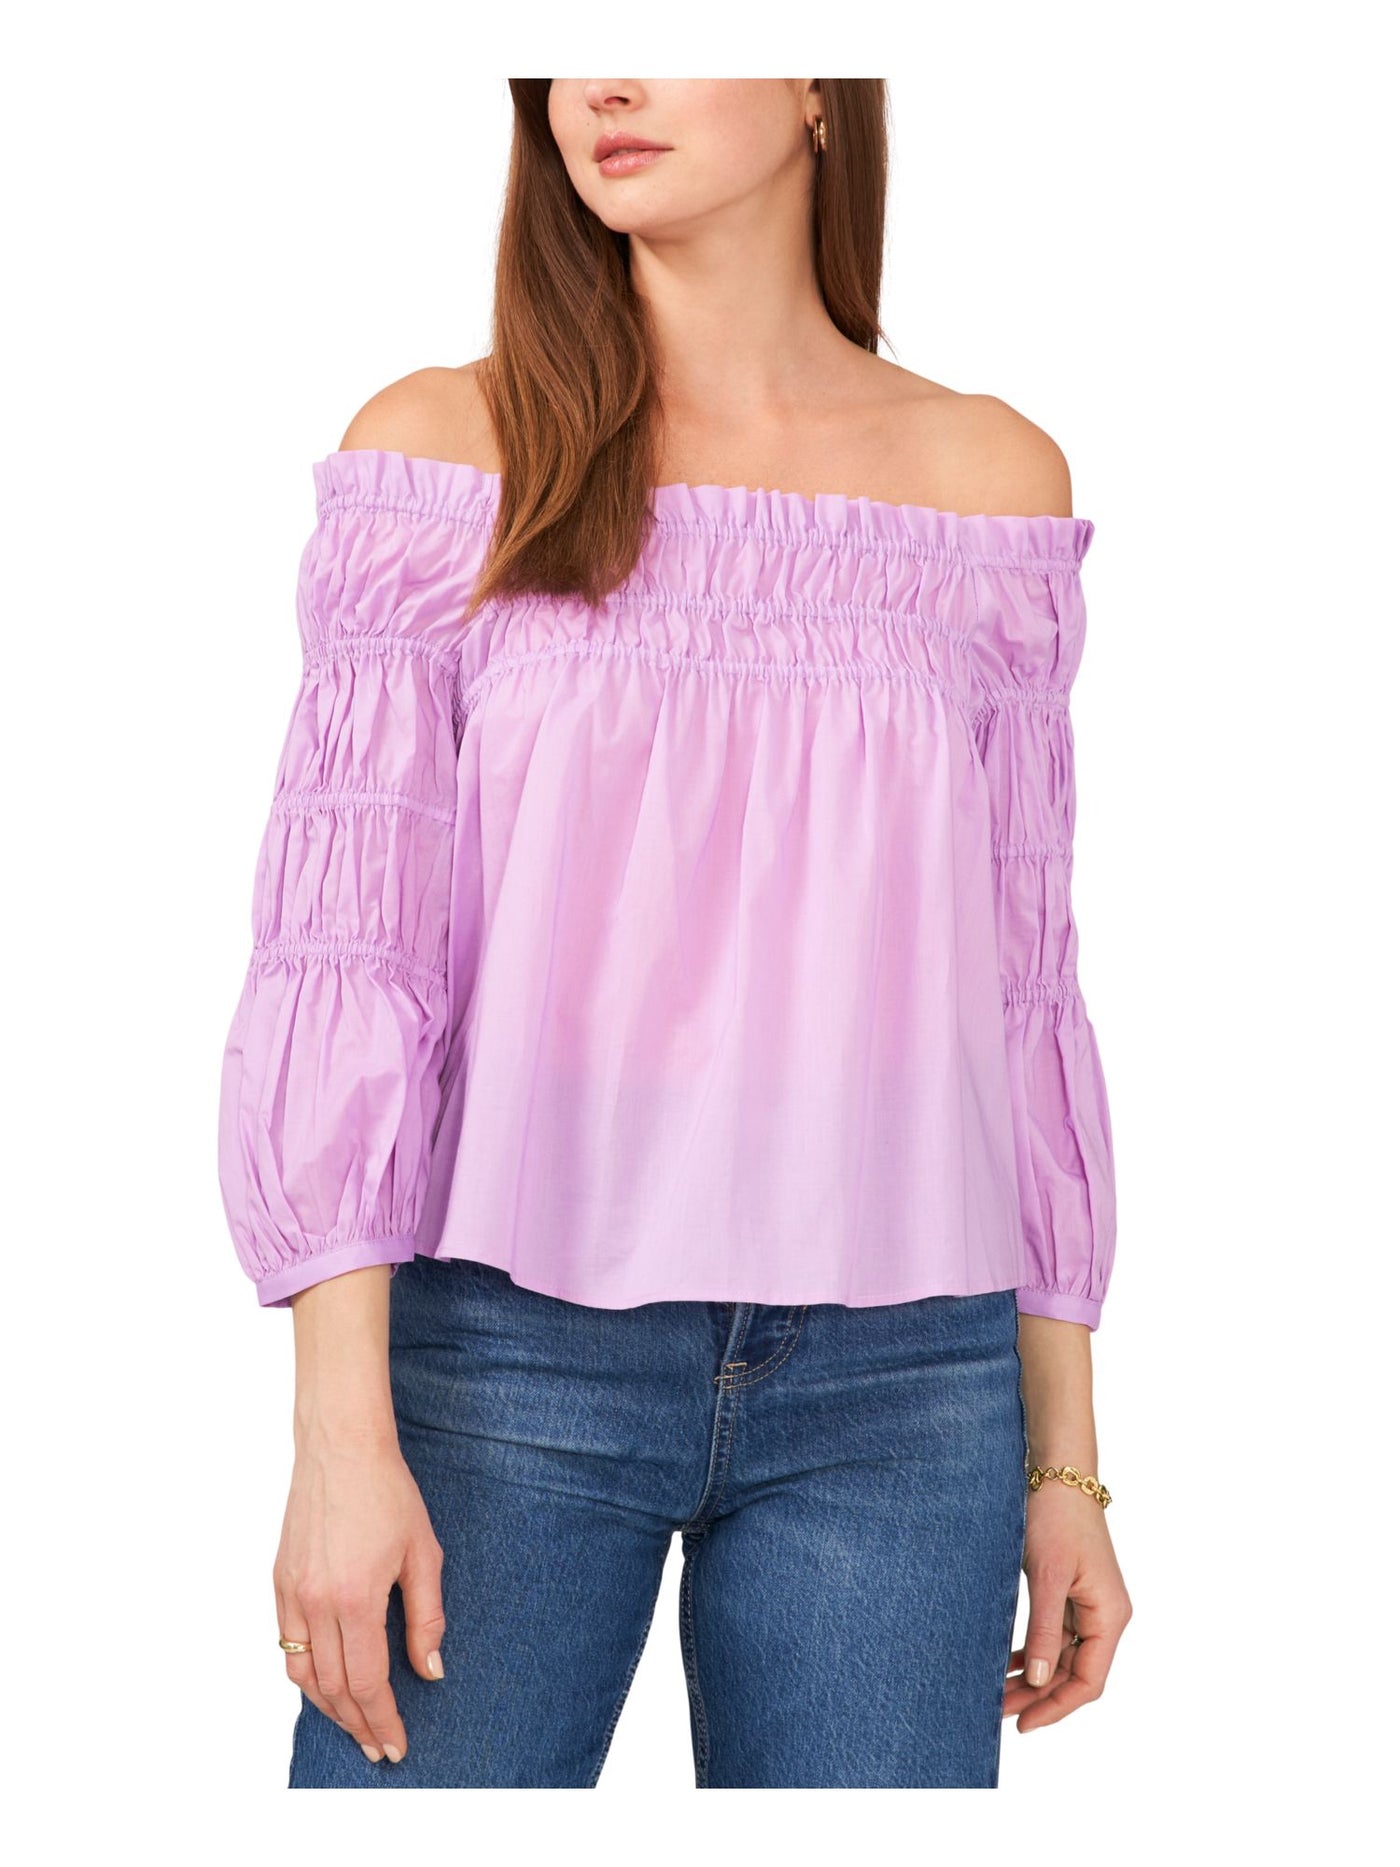 VINCE CAMUTO Womens Purple Smocked Sheer 3/4 Sleeve Off Shoulder Blouse XL